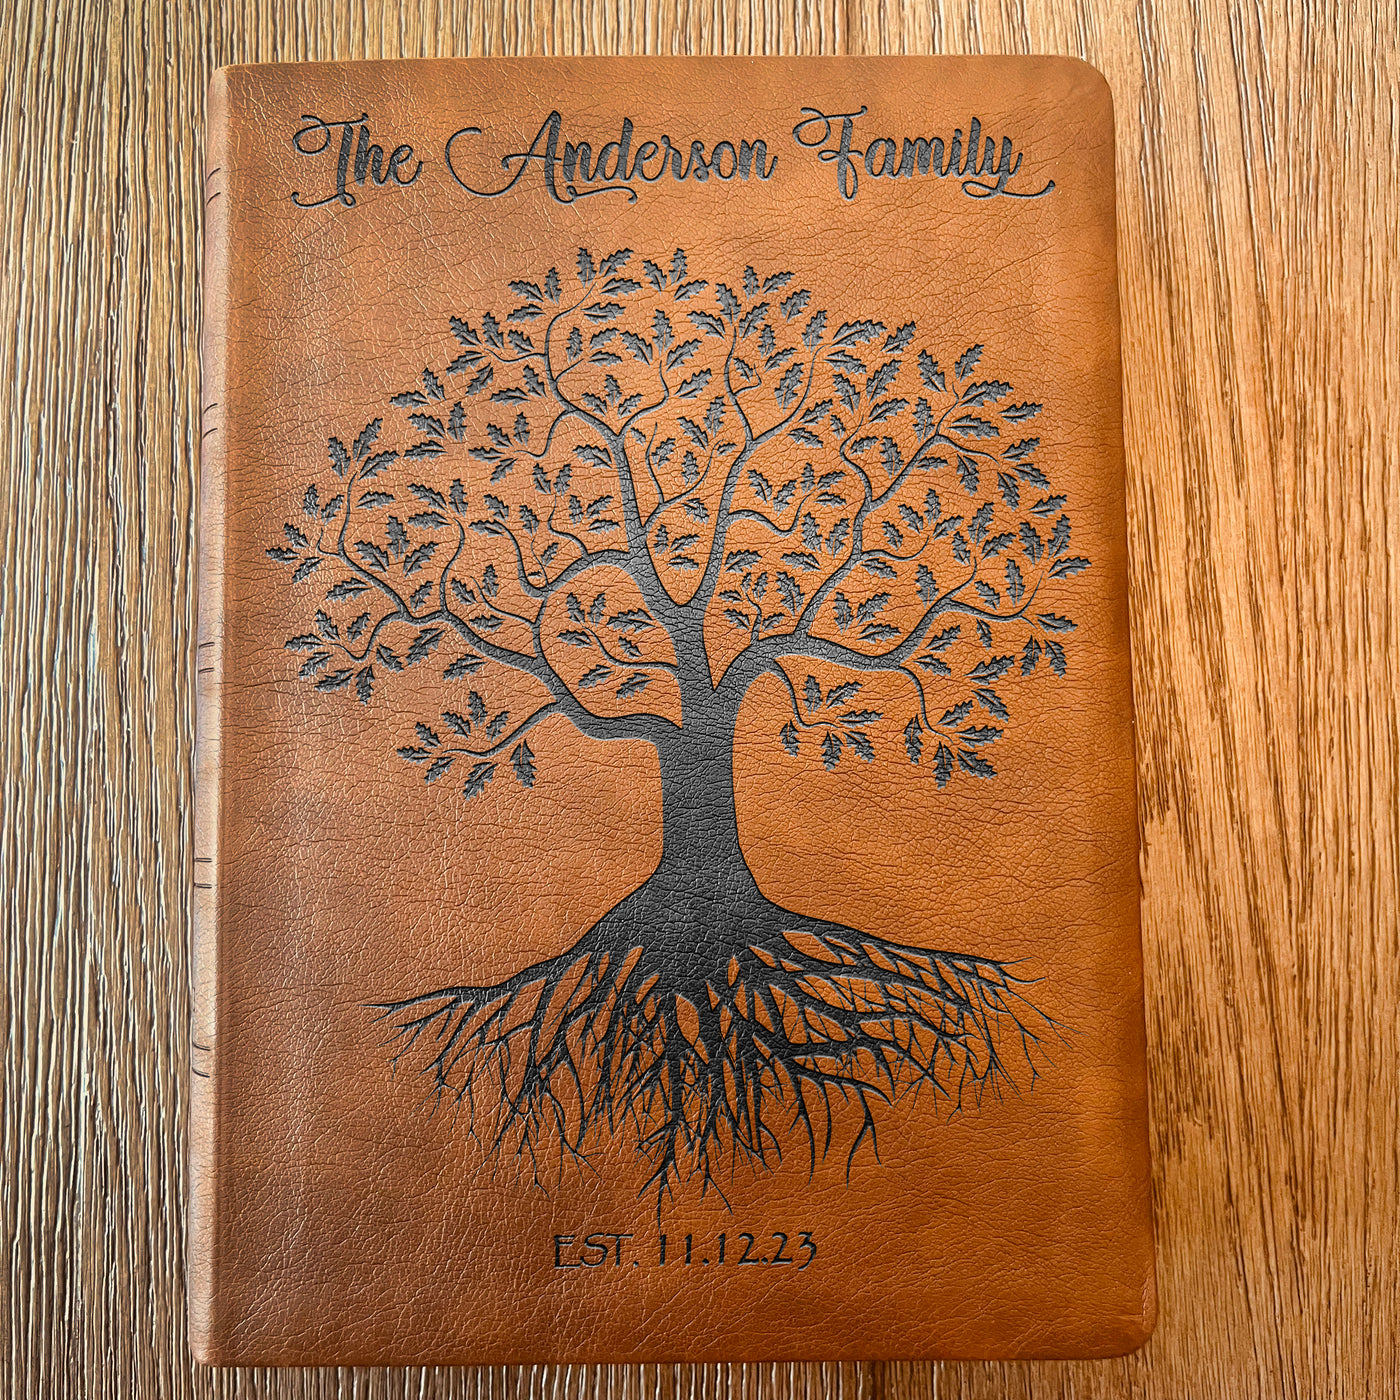 Personalized Family Bible | Custom NASB Family Tree Wide Margin Bible | Engraved Bible for Wedding Bible Christian Gifts NASB Family Bible